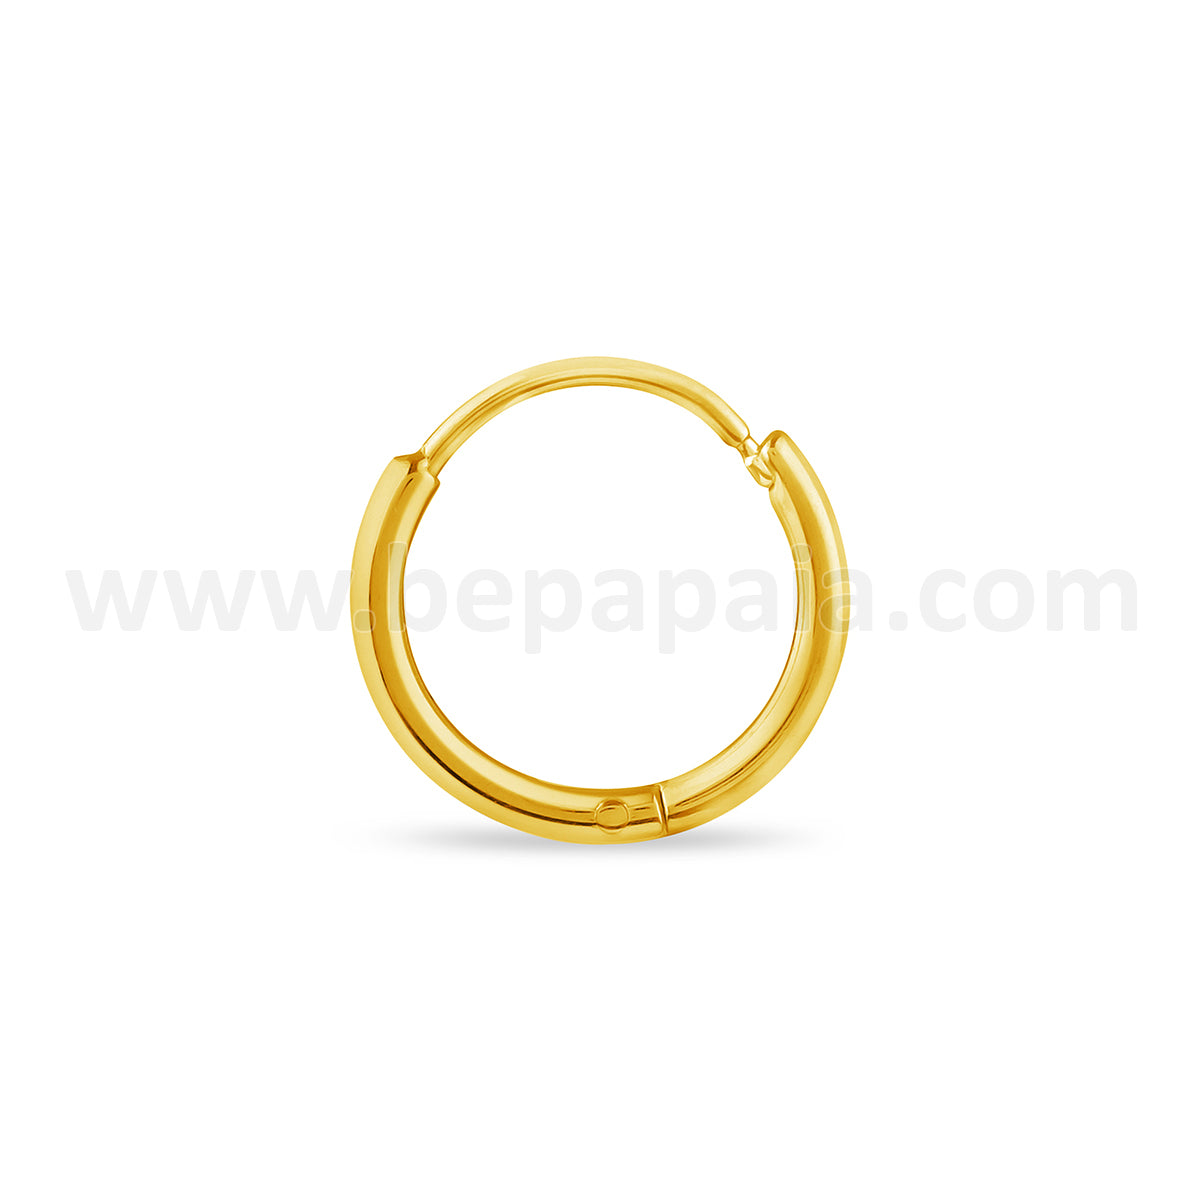 Stainless steel hoop earring gold colour 1.2mm